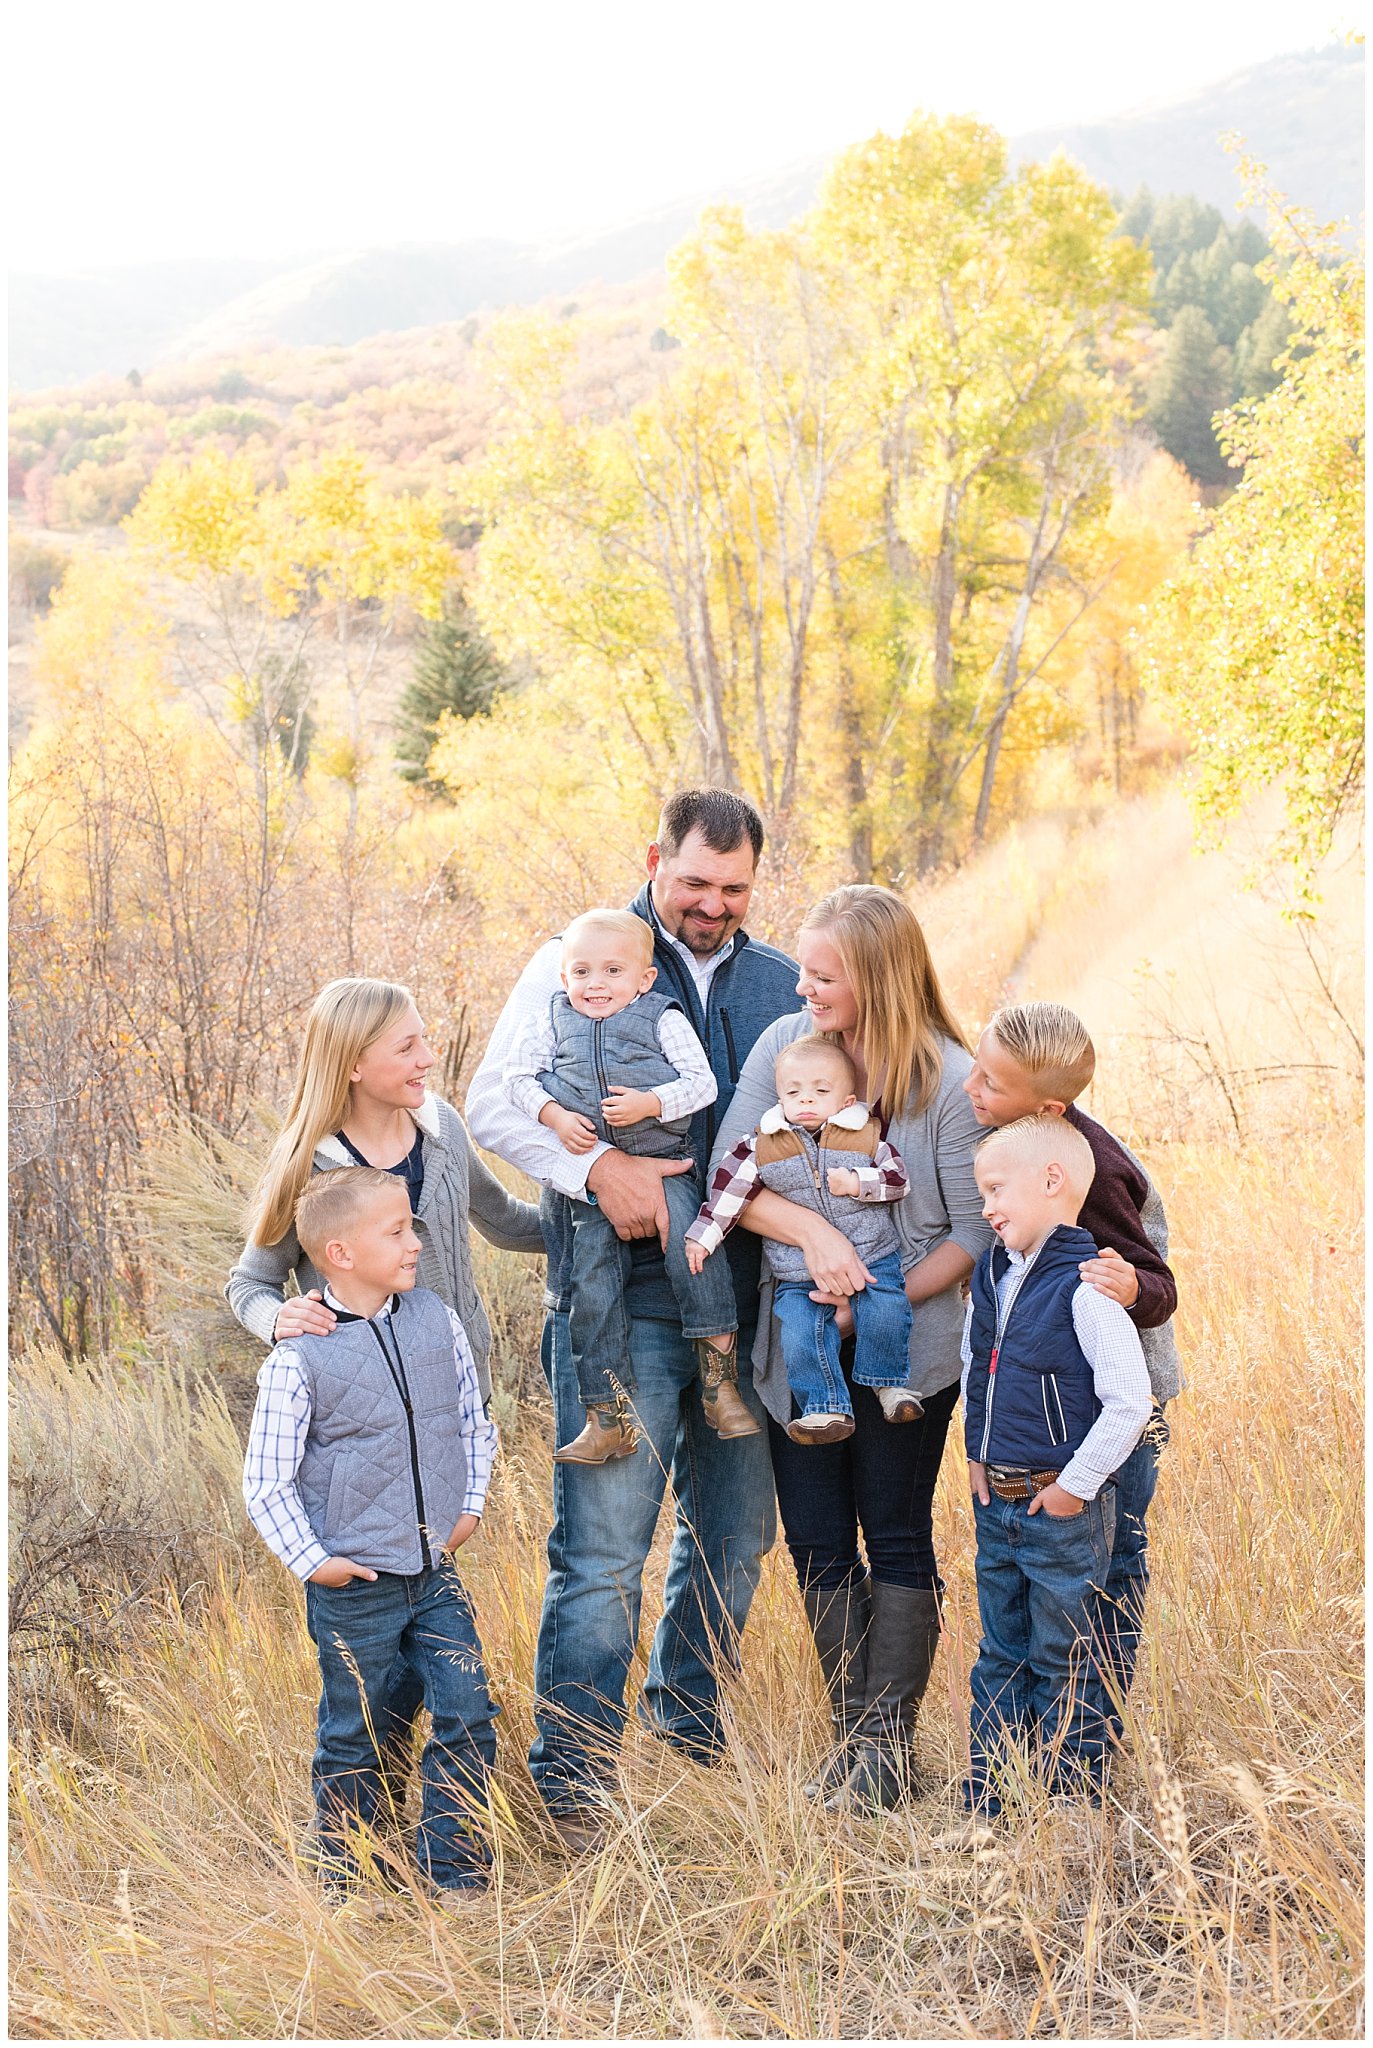 Candid fall family picture of family of 8 | Fall family photo session at Snowbasin | Snowbasin Resort | Jessie and Dallin Photography